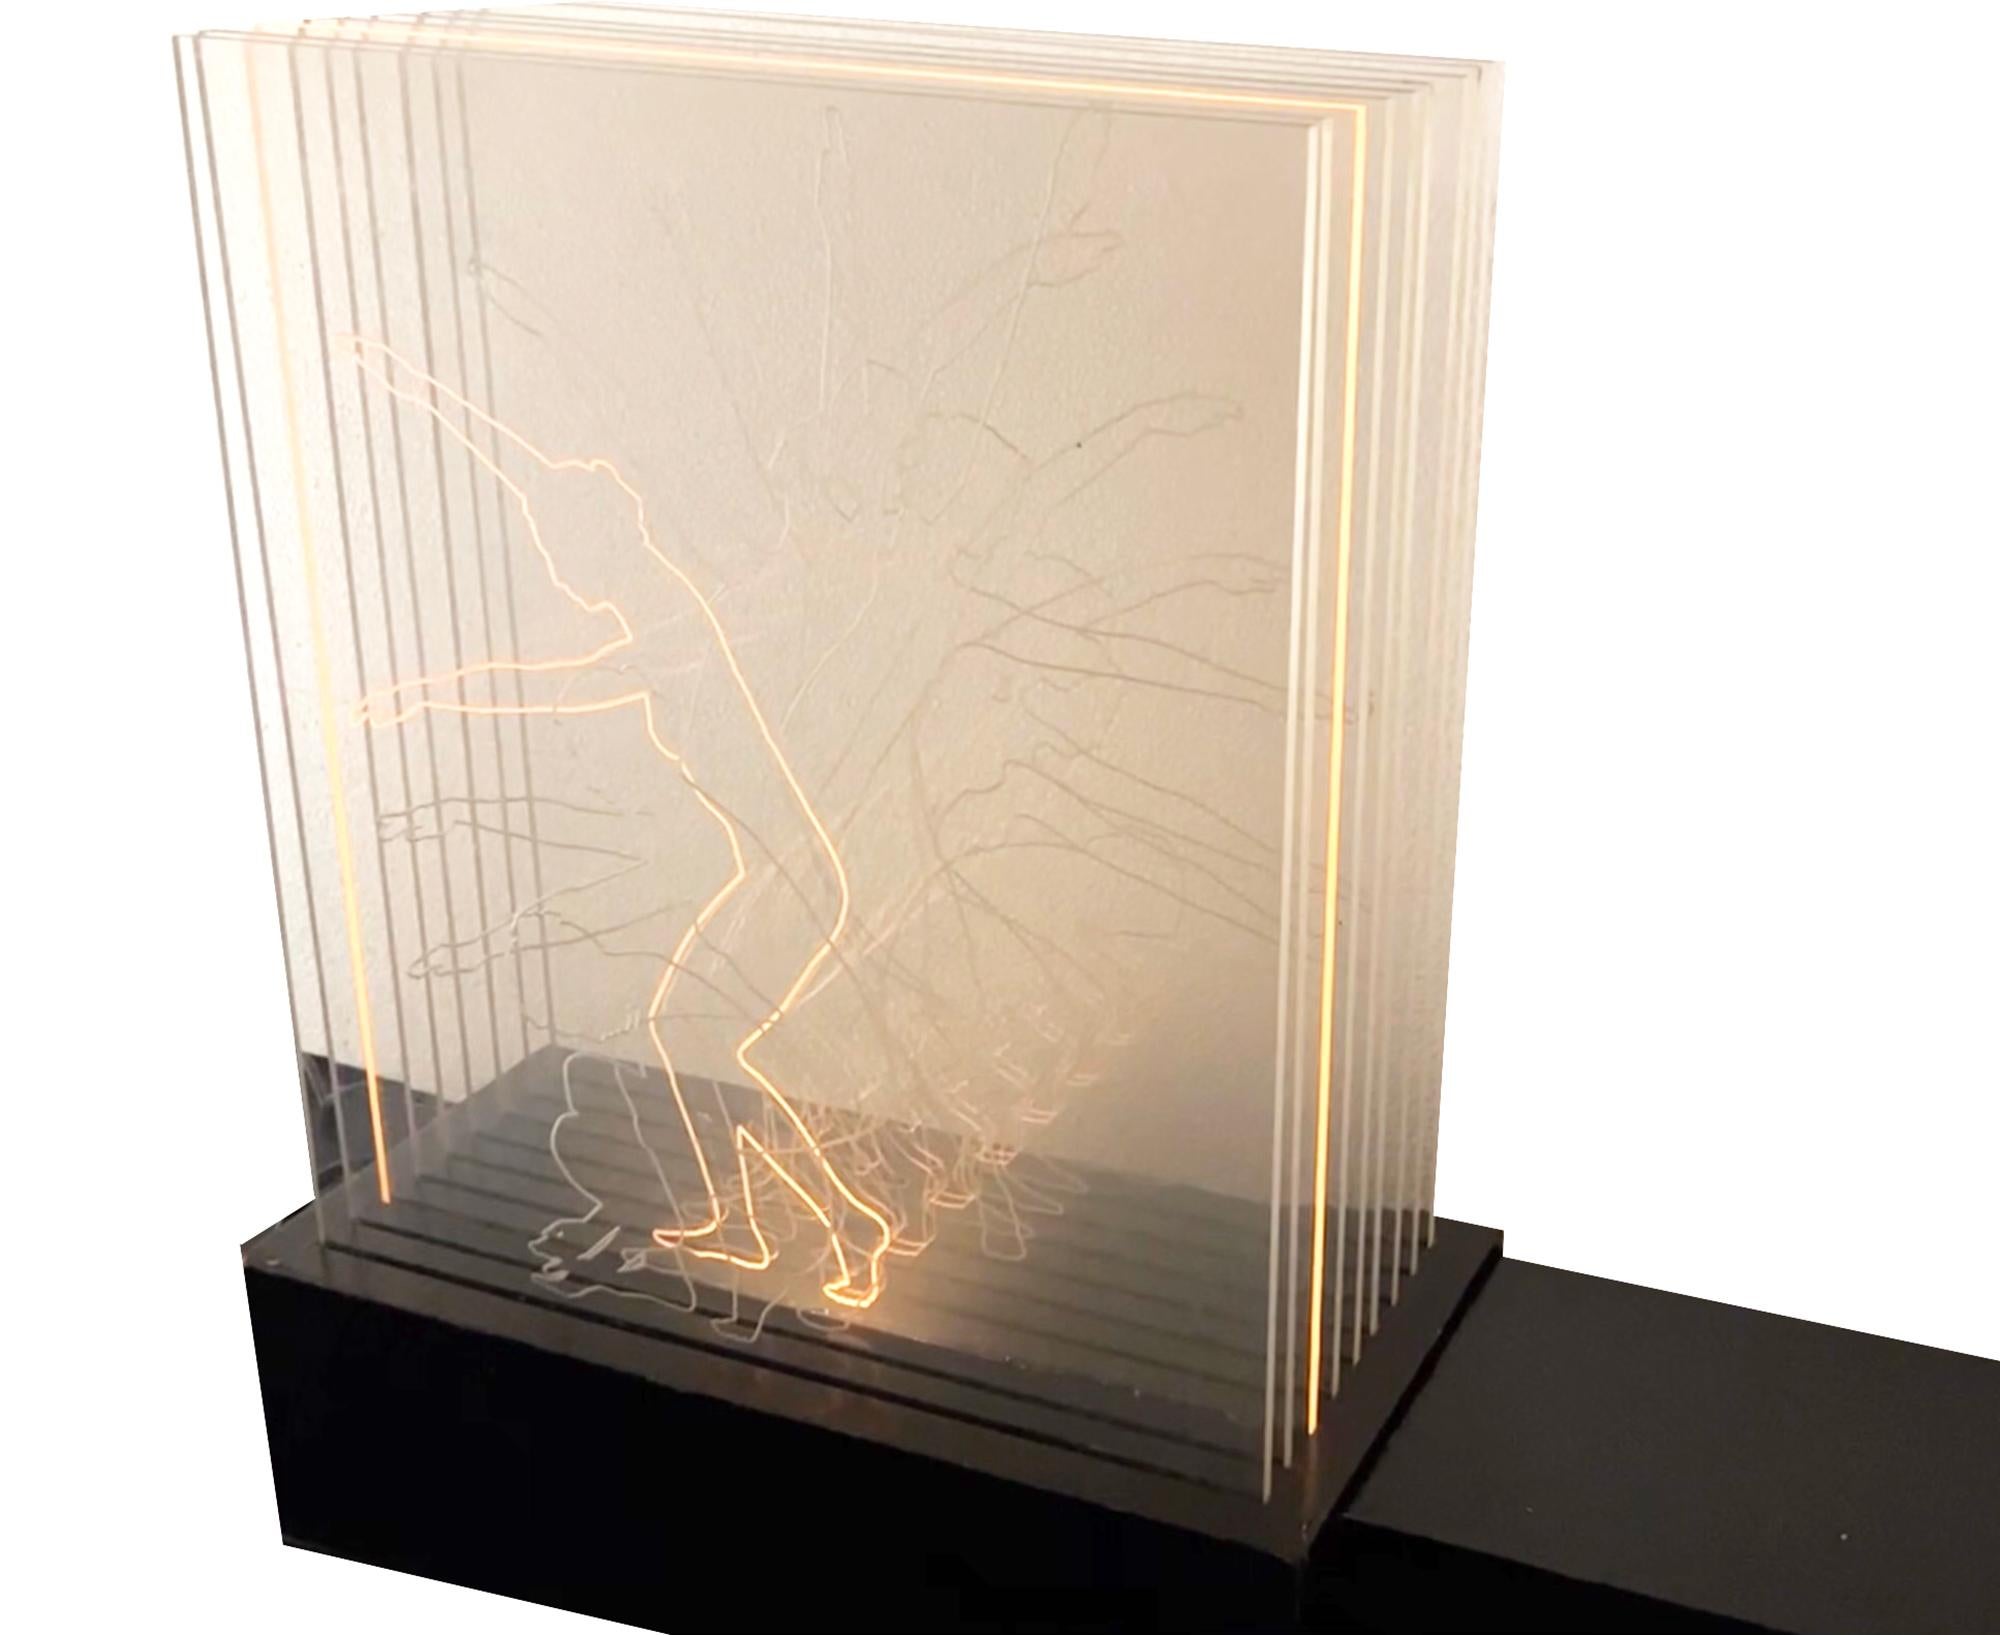 One of a kind, artist handmade sculpture box with sequential dance positions (from crouch to standing and back) etched in plexiglass panels. Kinetic action happens when light moves from front to back. There is a dial on the transformer that controls